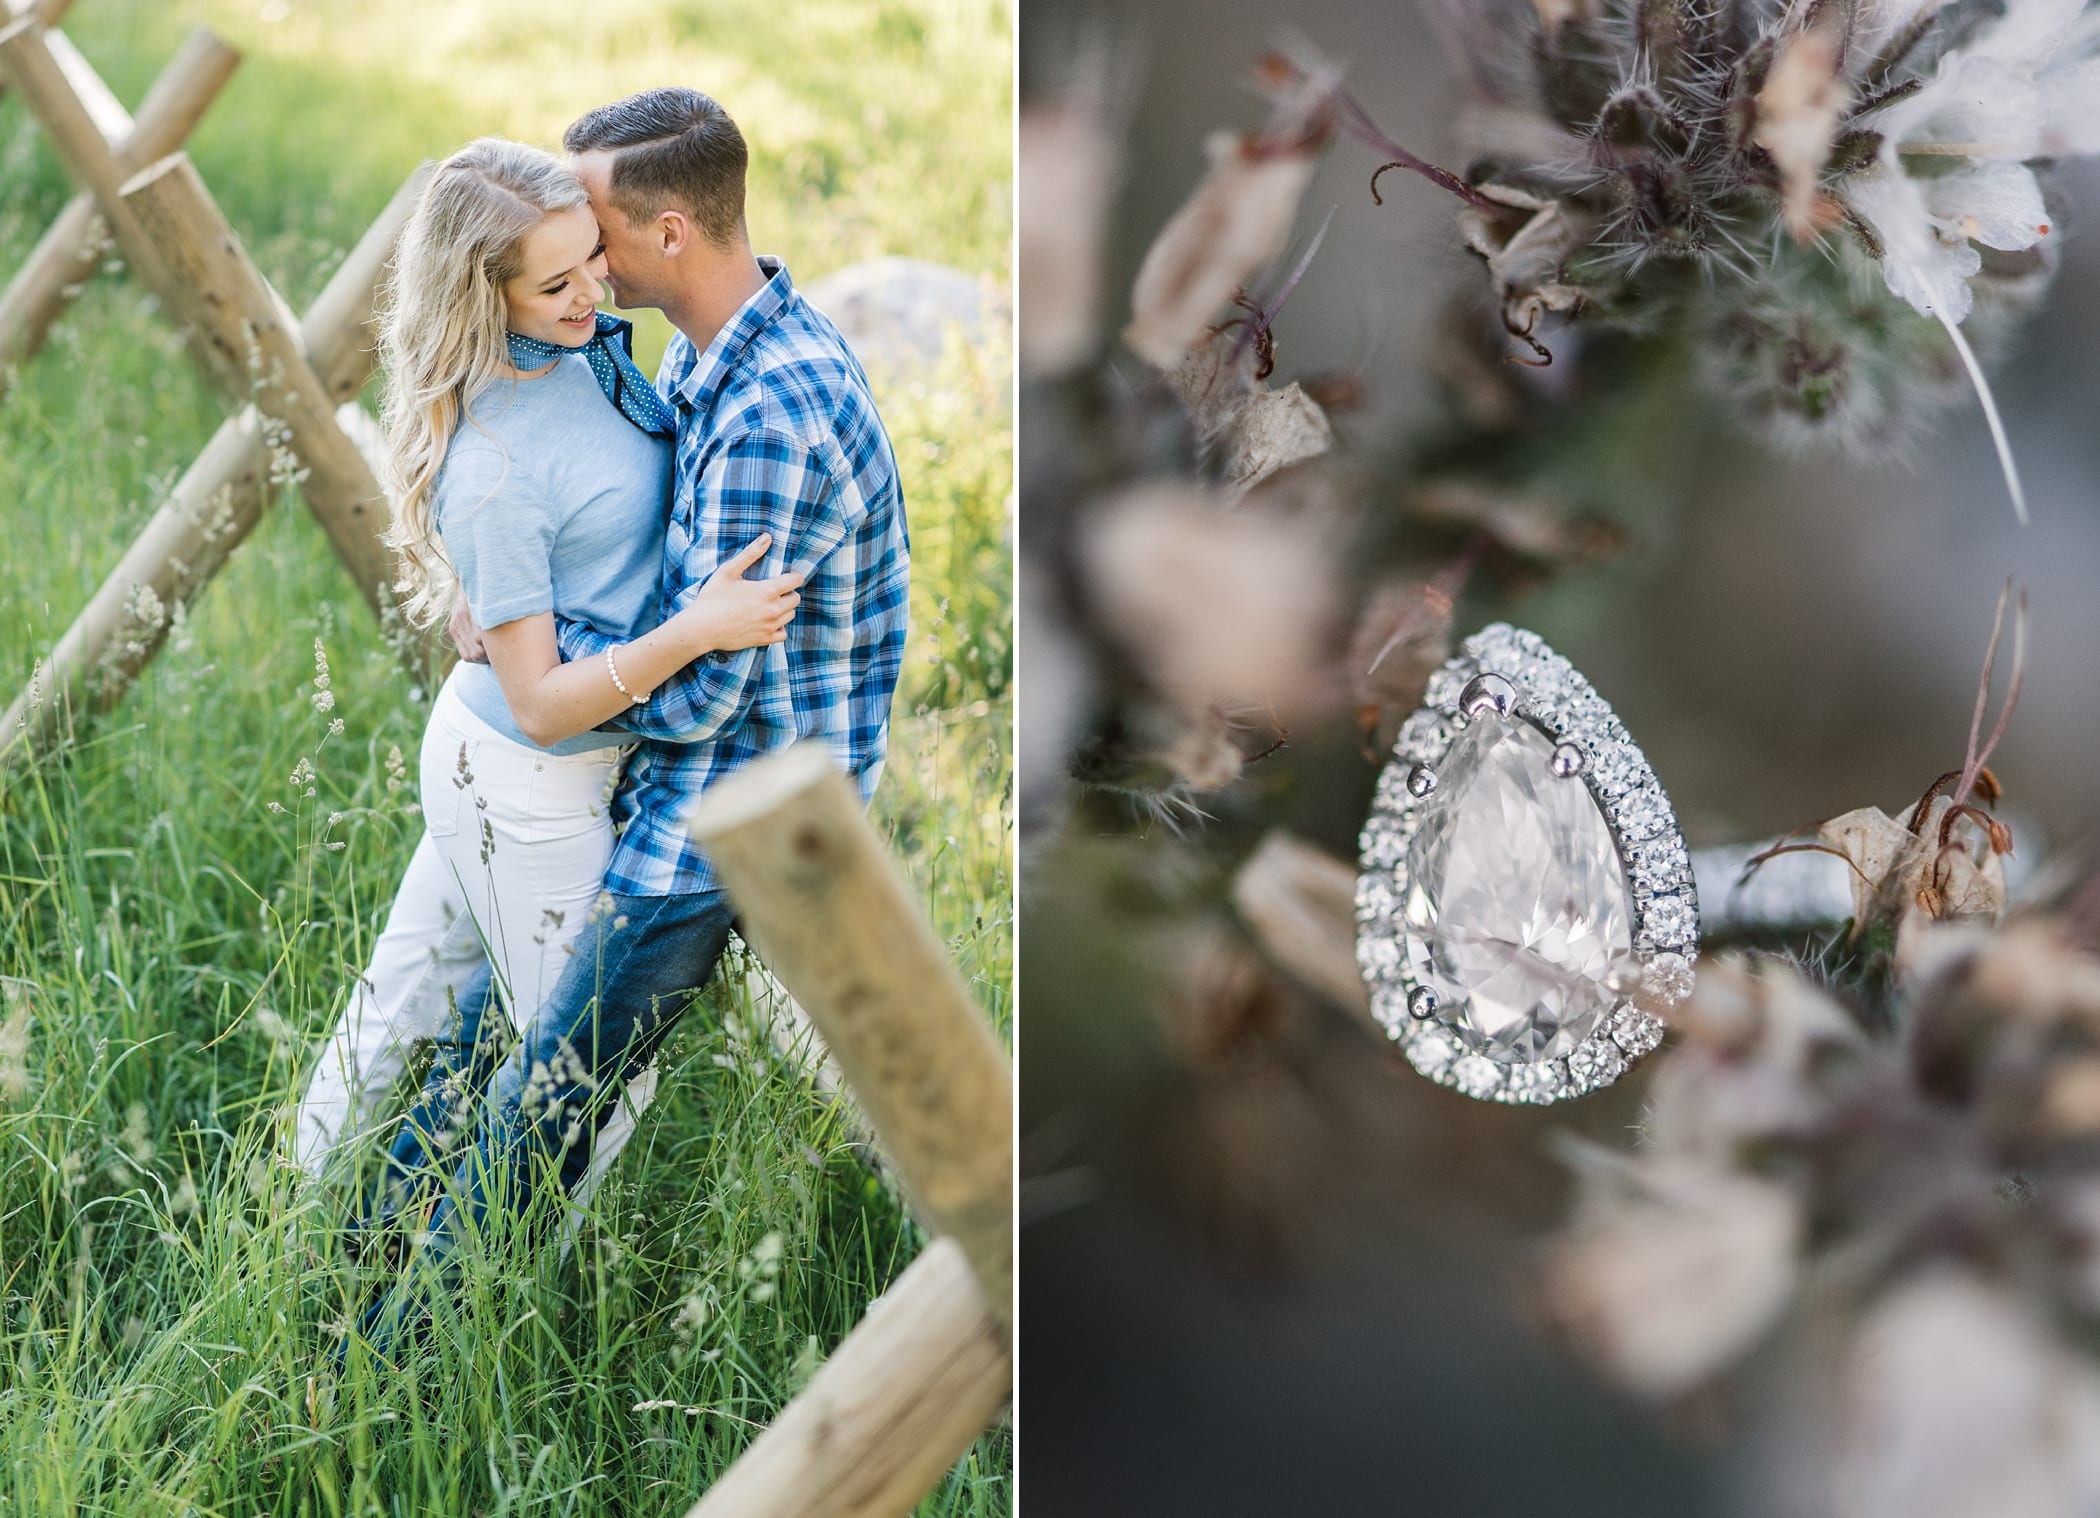 Idaho Falls Engagements | Summery Engagements in the Idaho Mountains | Michelle & Logan